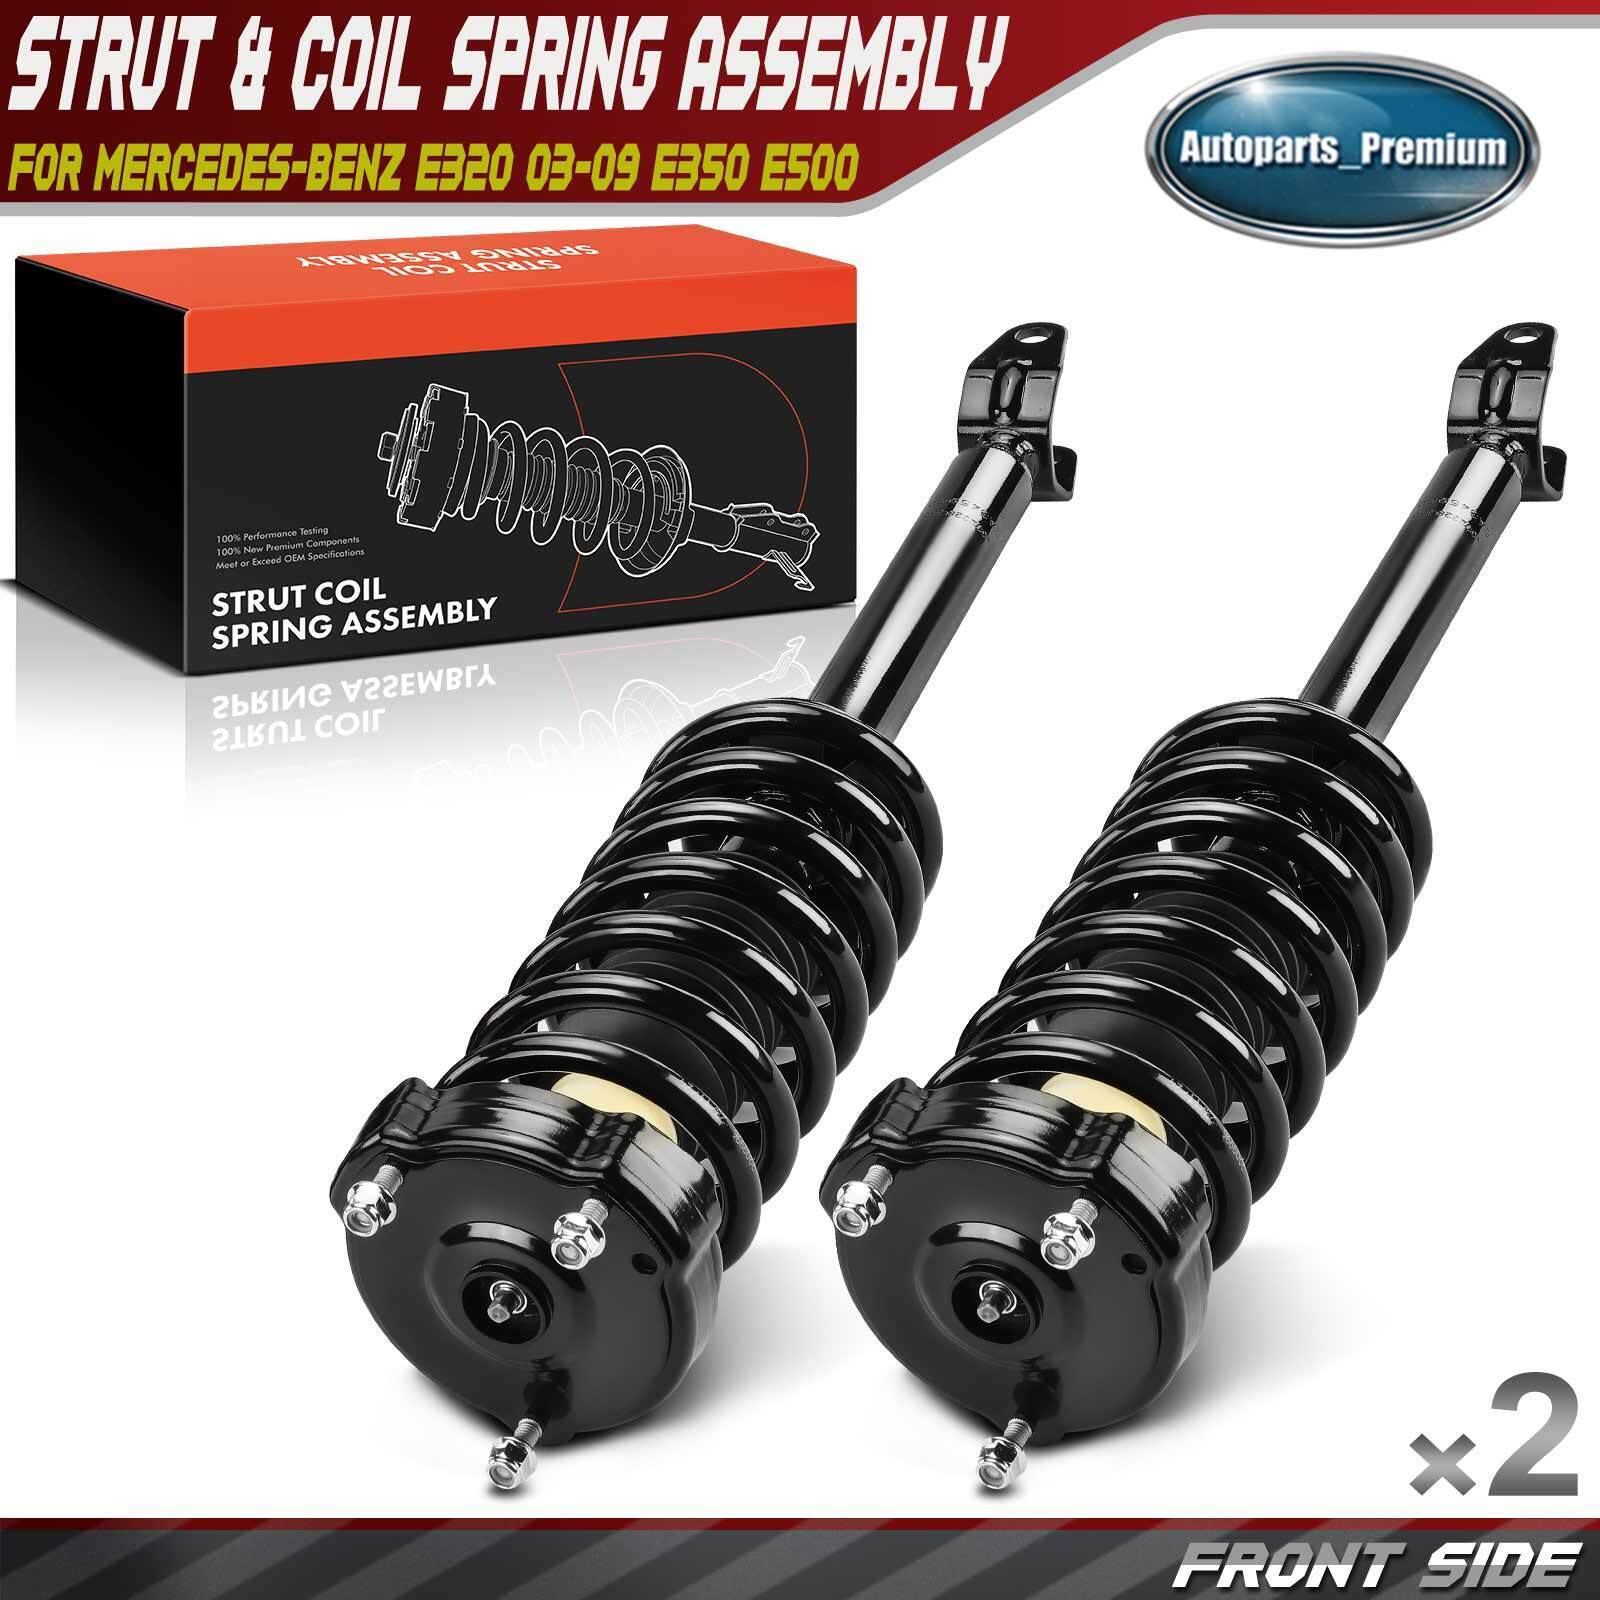 2x Front Complete Strut & Coil Spring Assembly for Benz E320 2003-2009 E350 E500